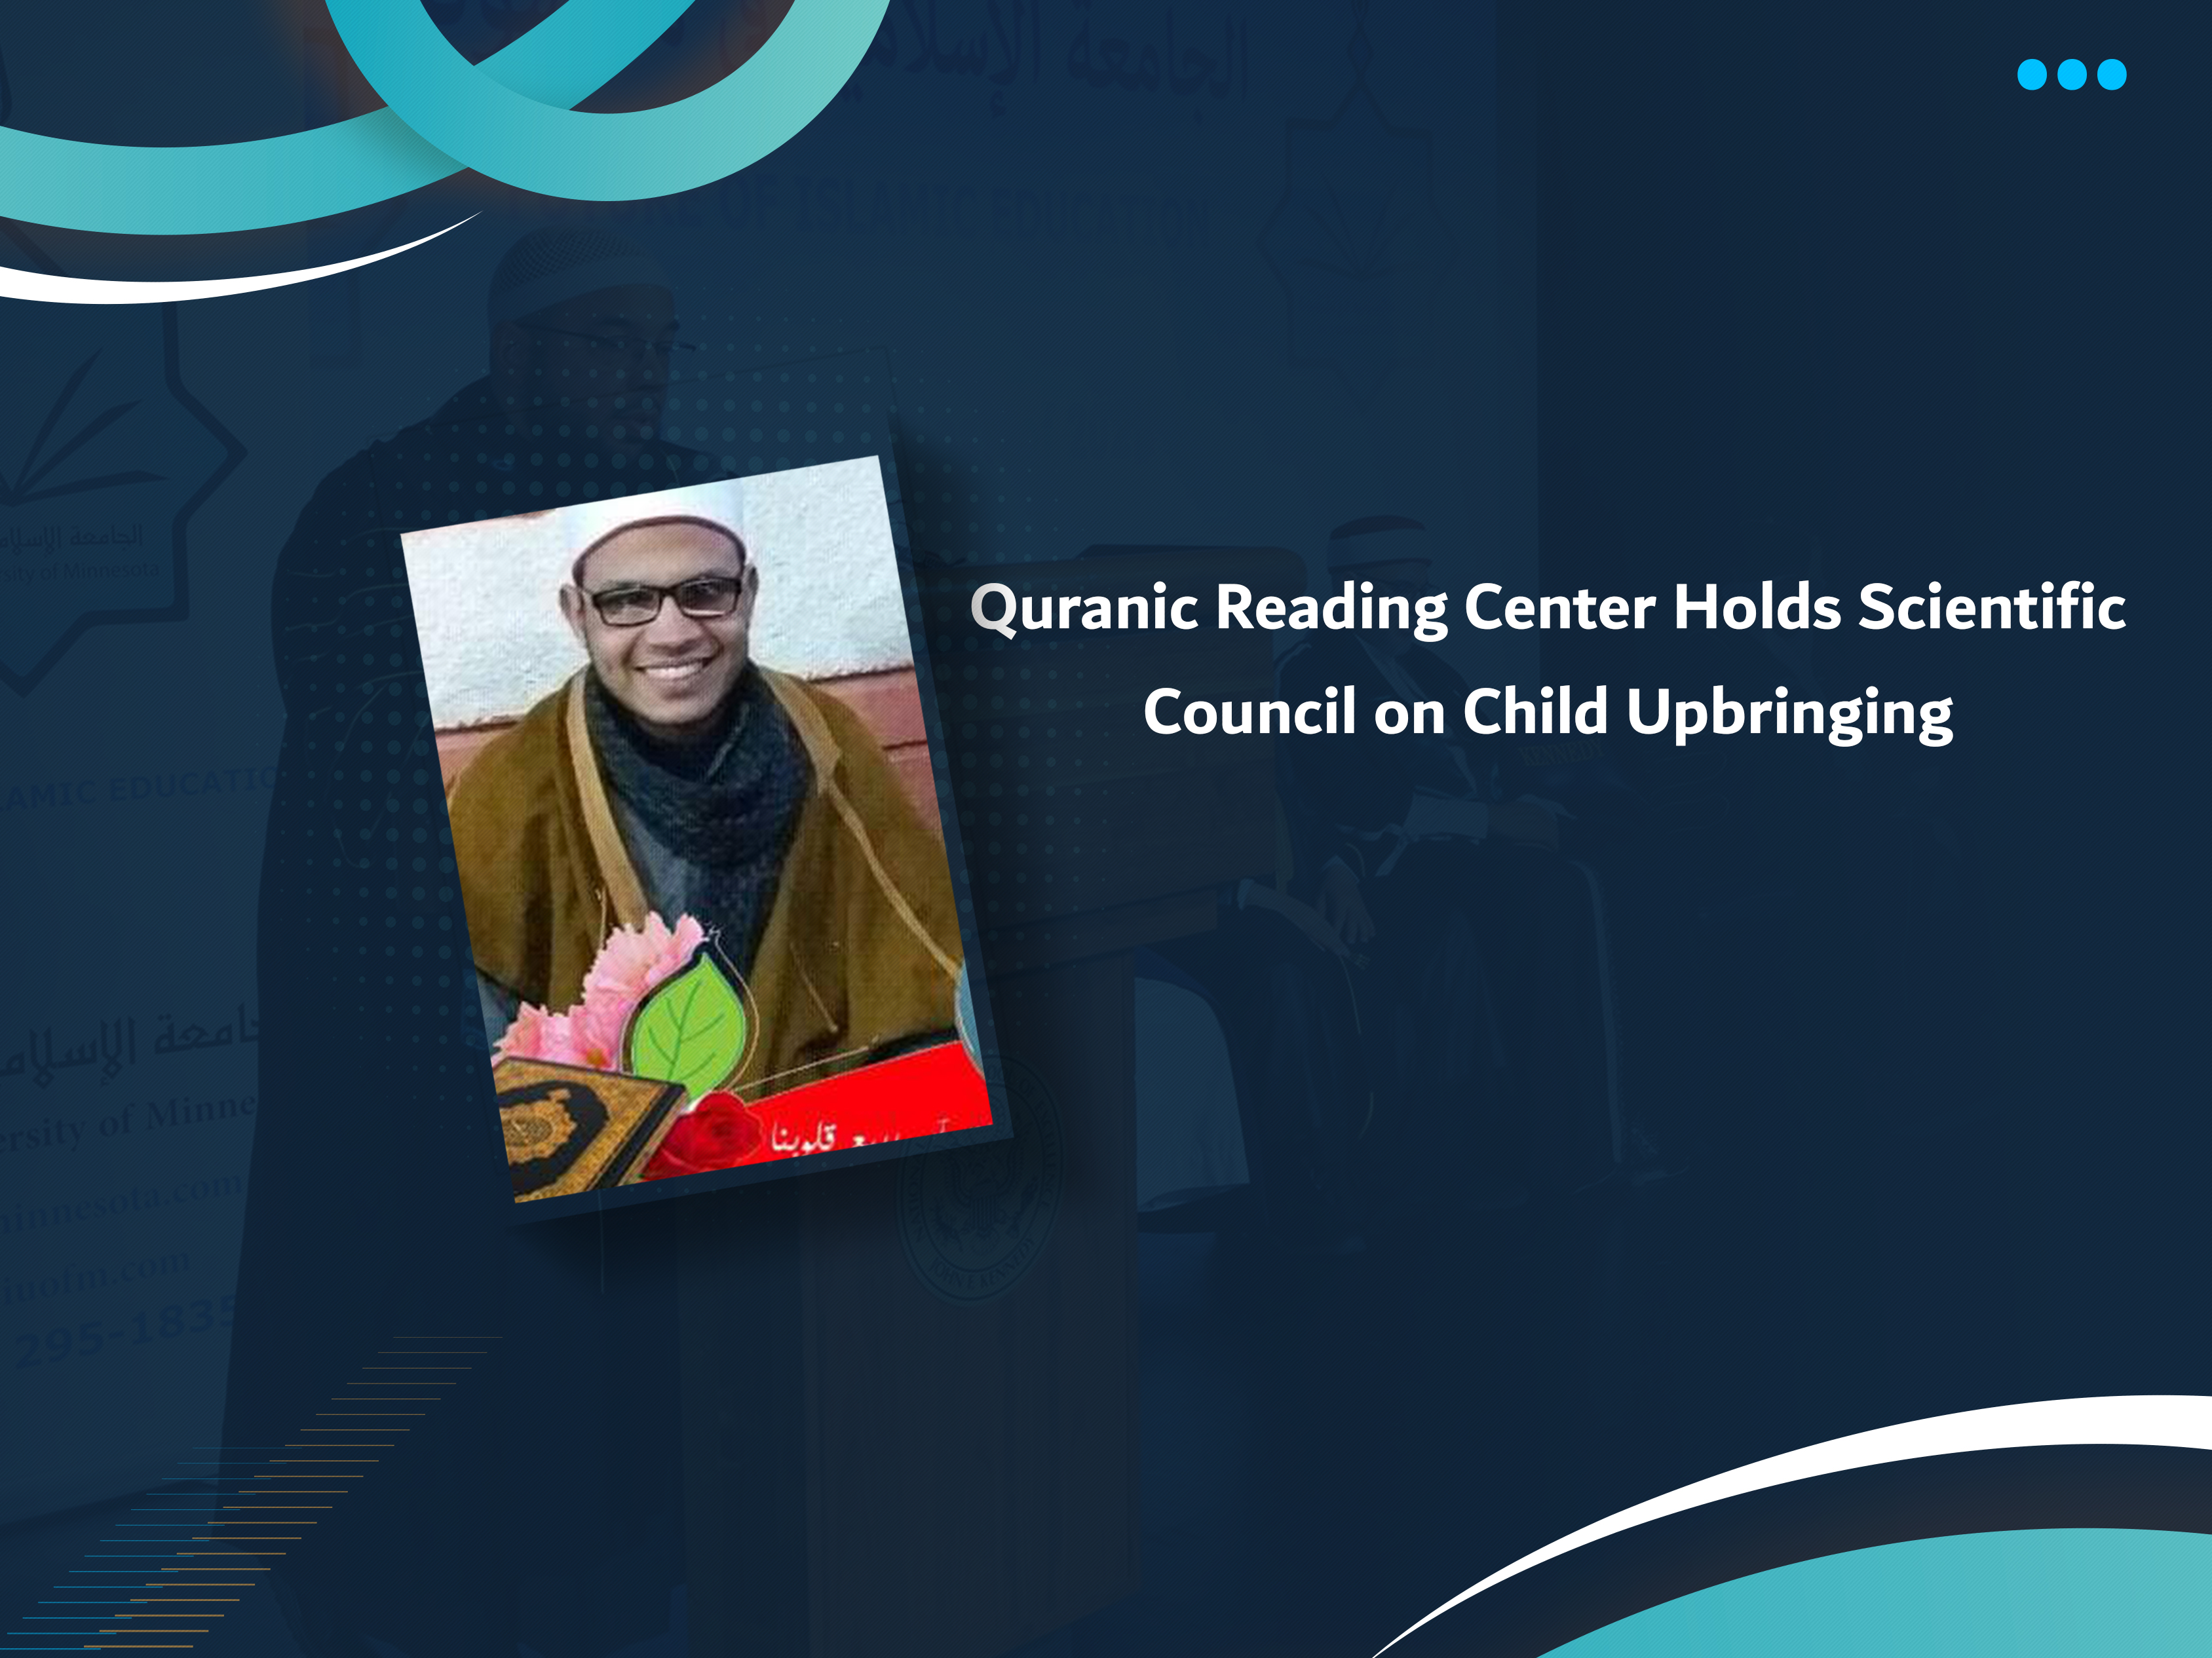 Quranic Reading Center Holds Scientific Council on Child Upbringing